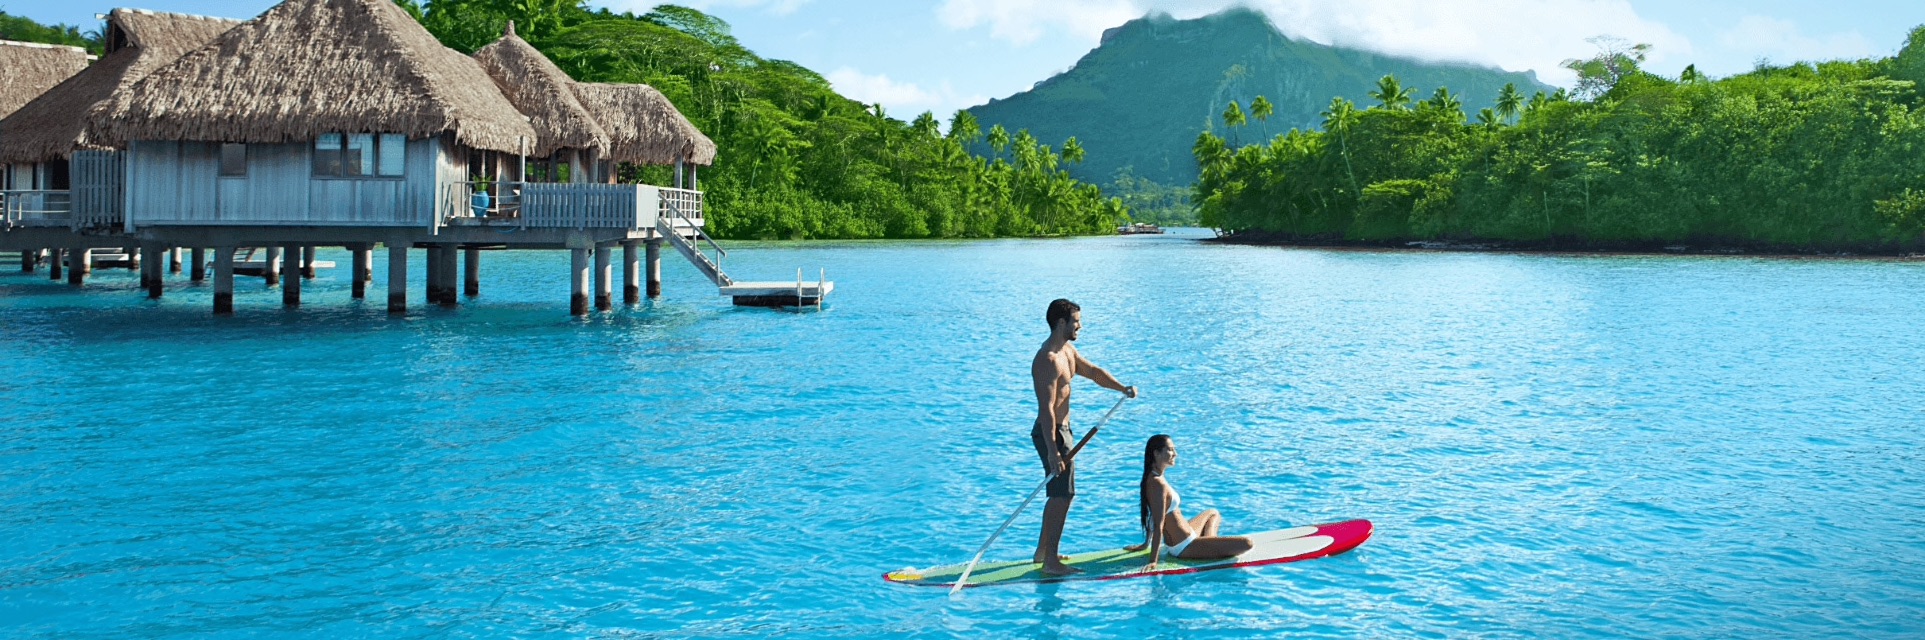 a man and woman on a paddle board in water